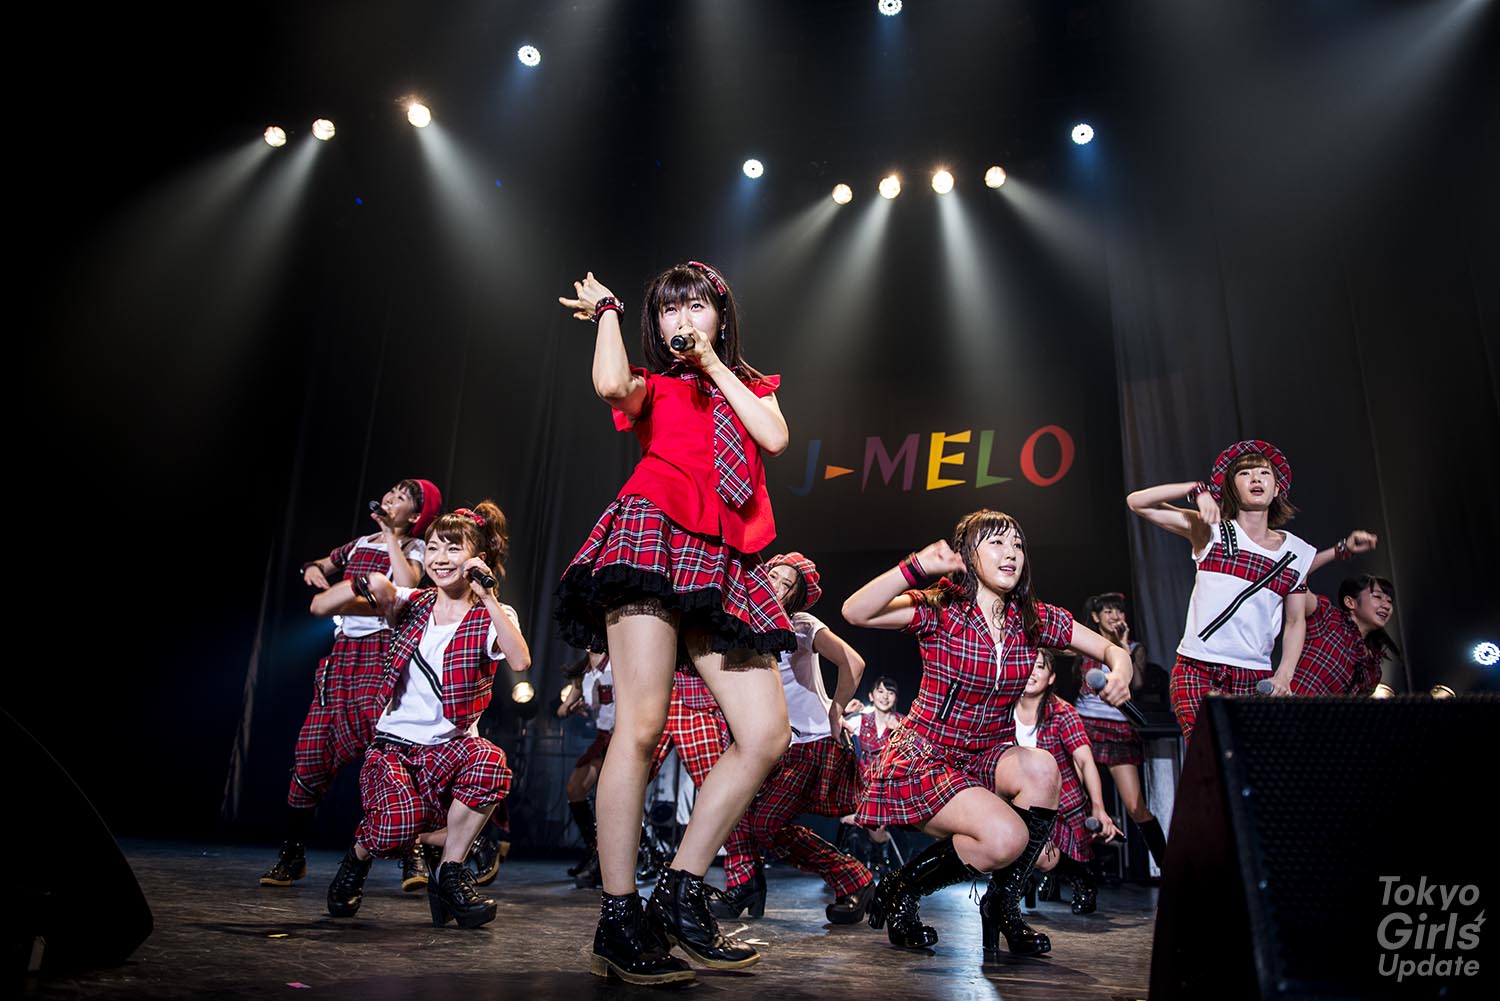 J-MELO 10th Anniversary Concert : Morning Musume。’15, Eir Aoi, Silent Siren, and May J.  On Stage!